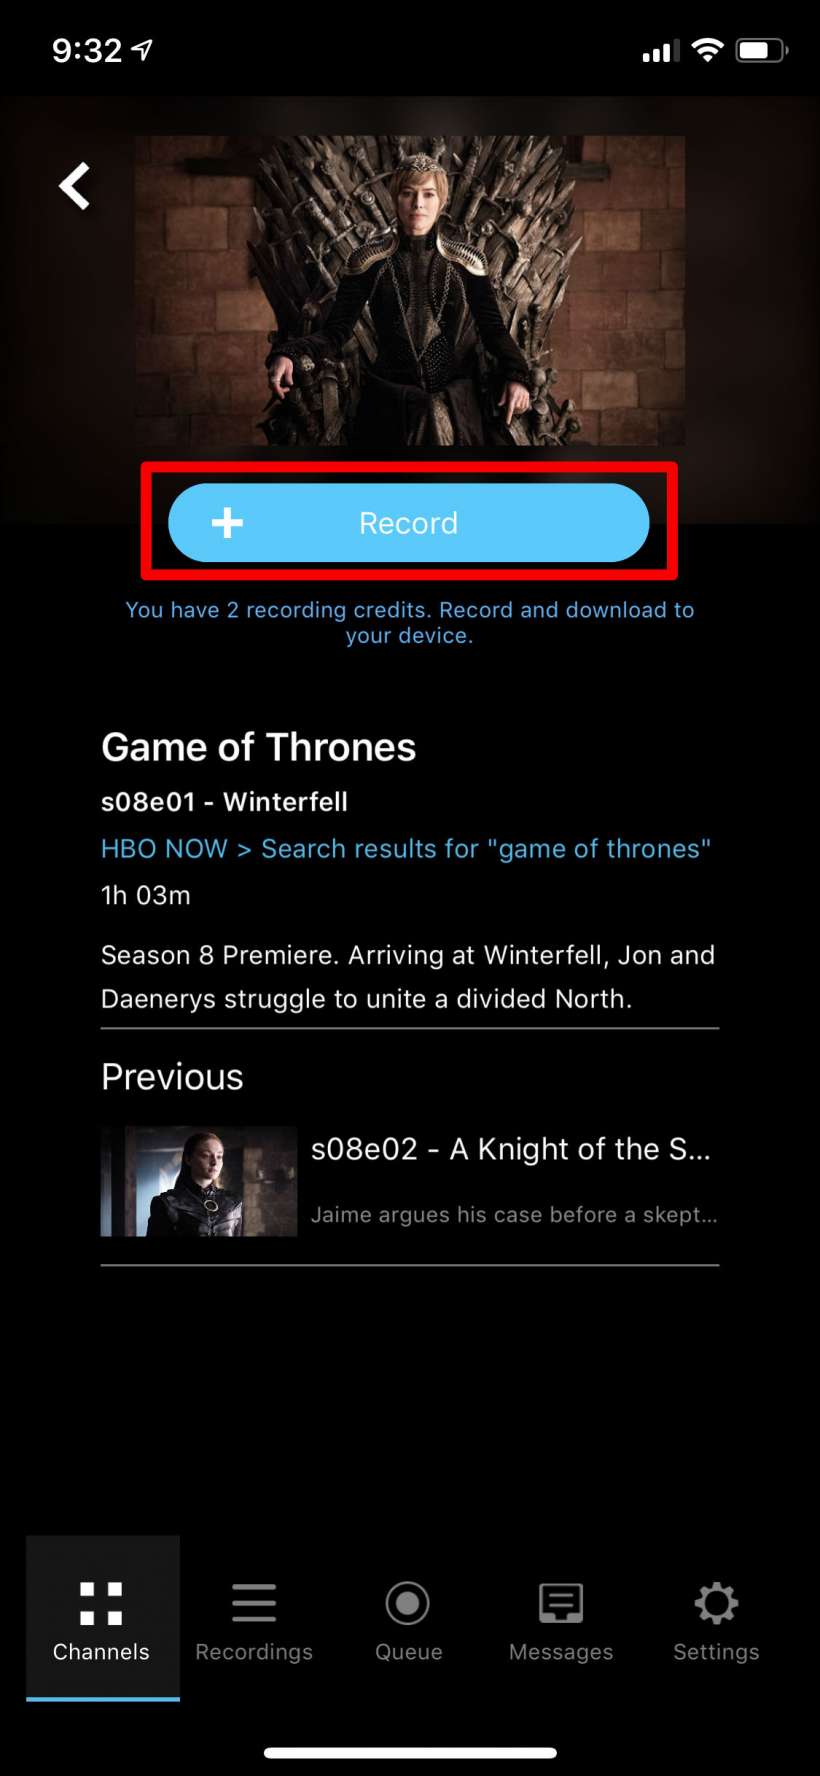 How to watch HBO, Showtime, Hulu, Netflix and more offline with PlayOn Cloud on iPhone and iPad.